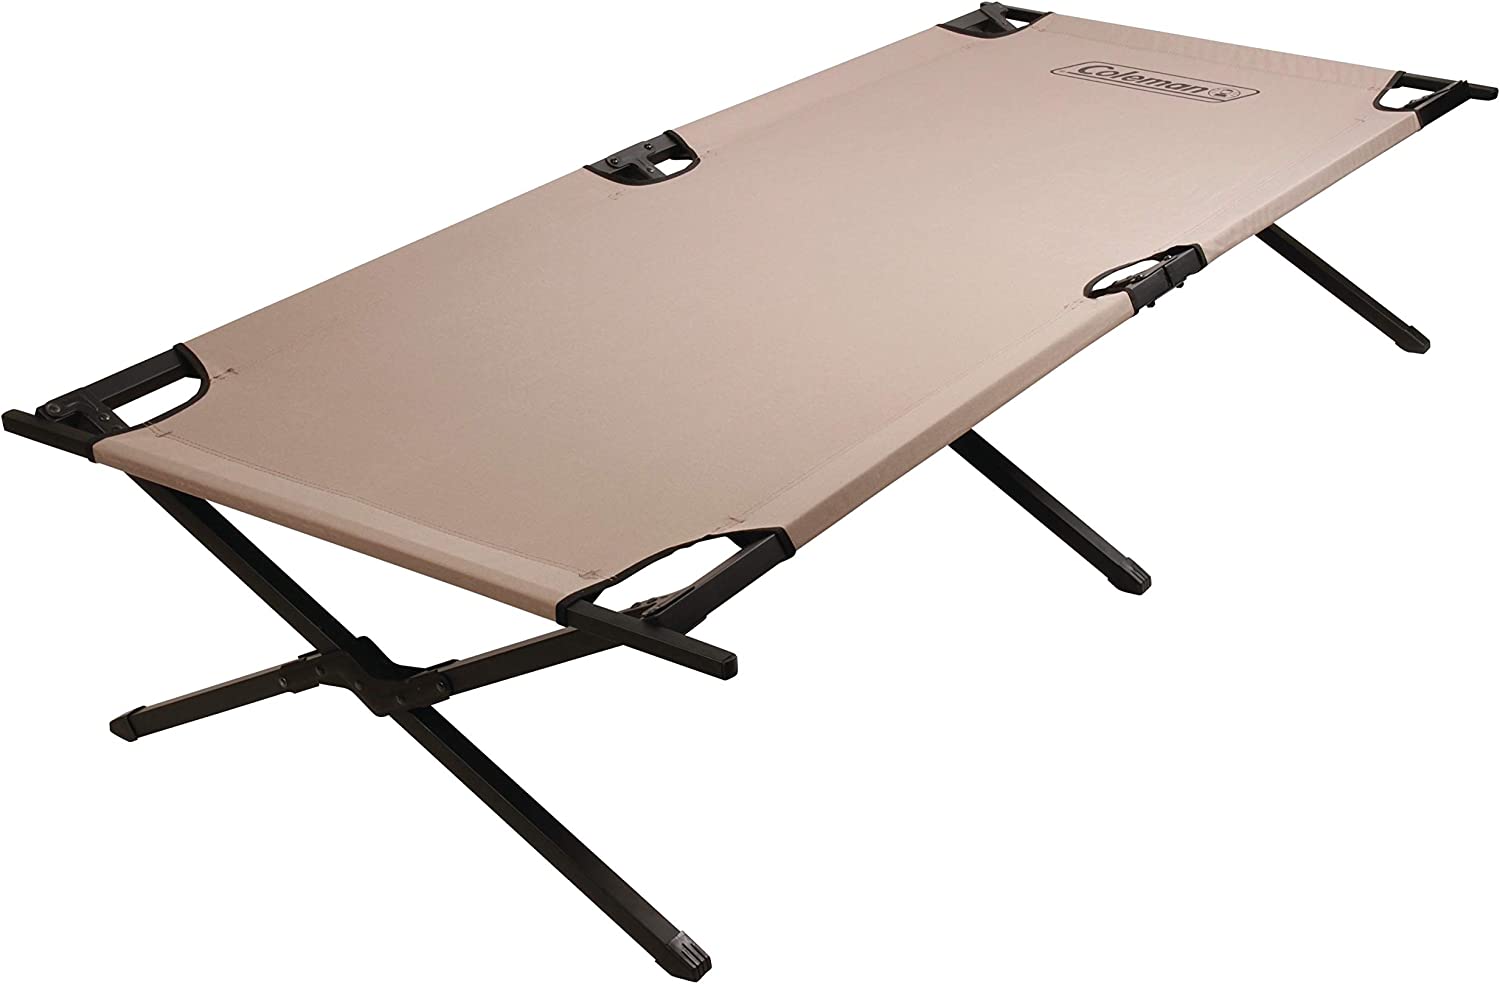 one of the Best Camping Cots and Air Mattresses  is Coleman Trailhead II Cot